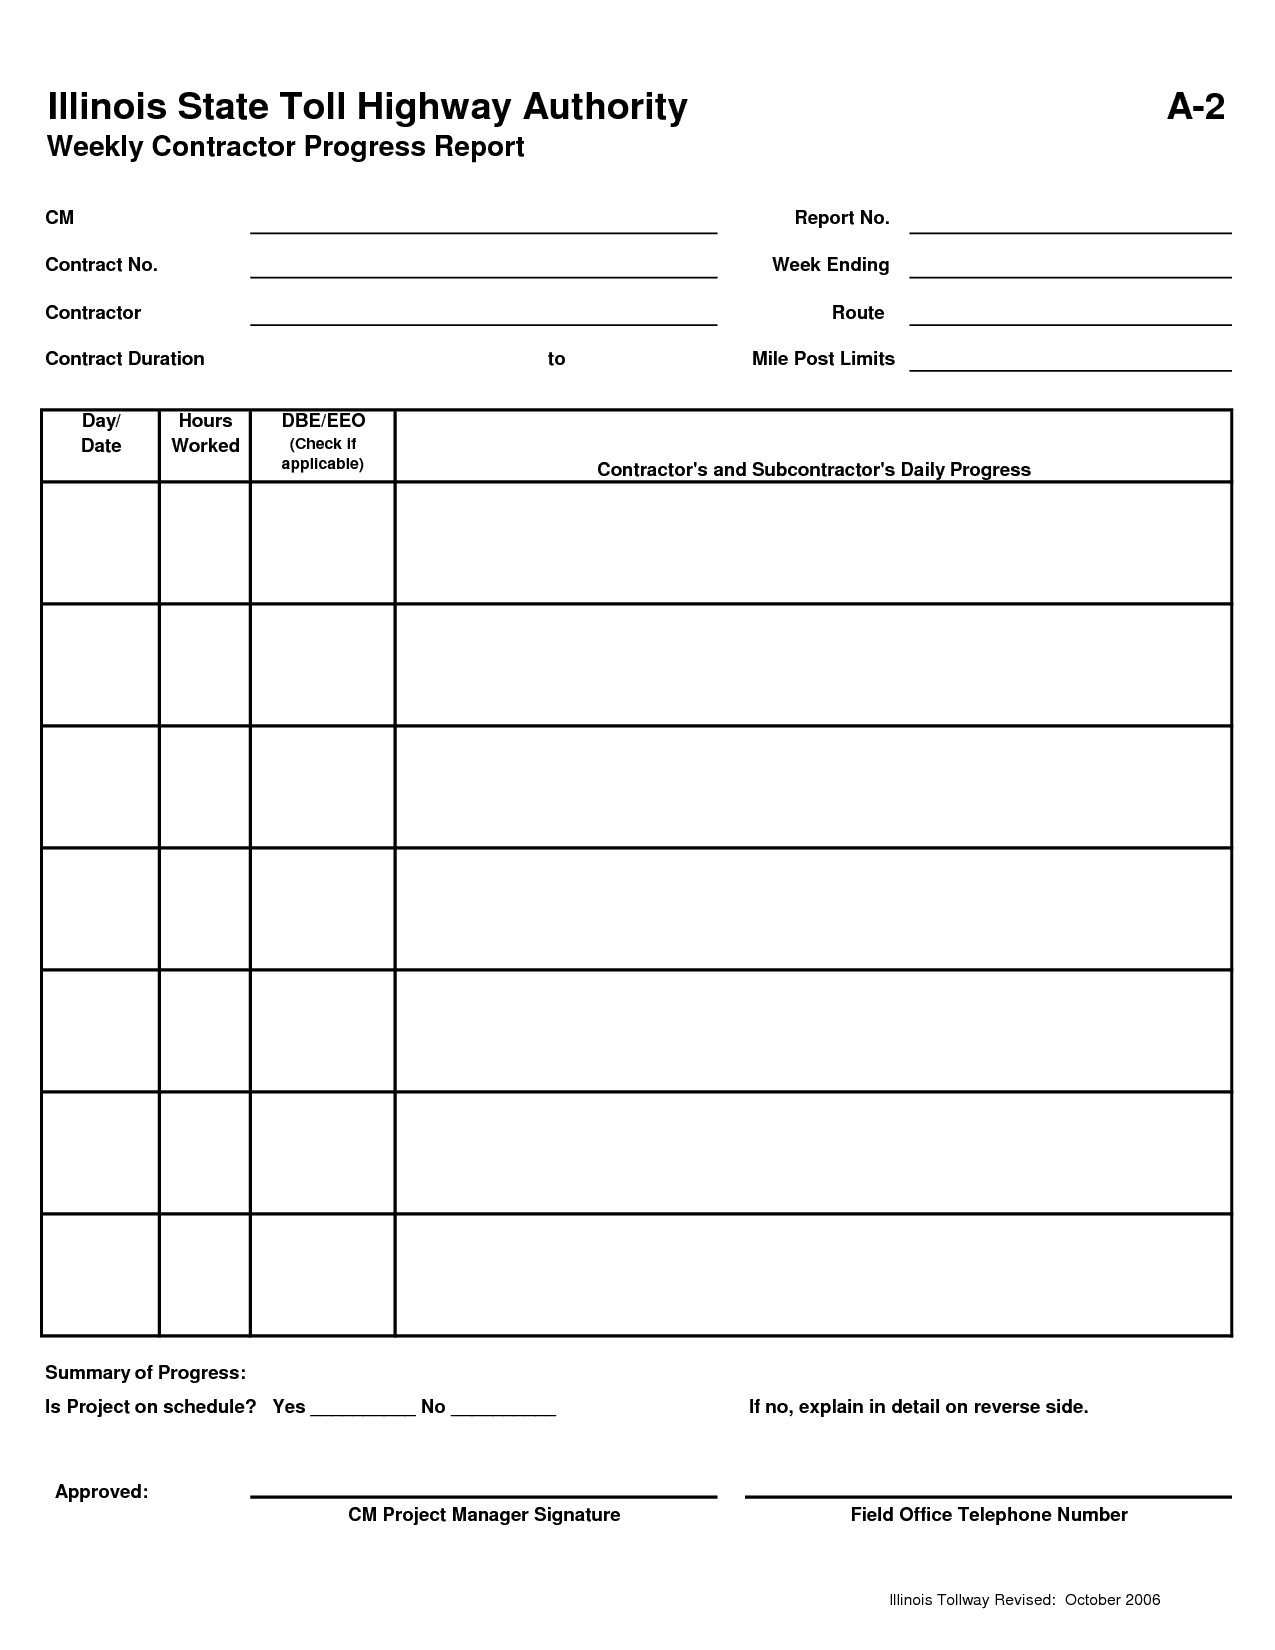 Bookkeeping Eadsheet For Small Business And Gas Station Pertaining To Daily Status Report Template Xls